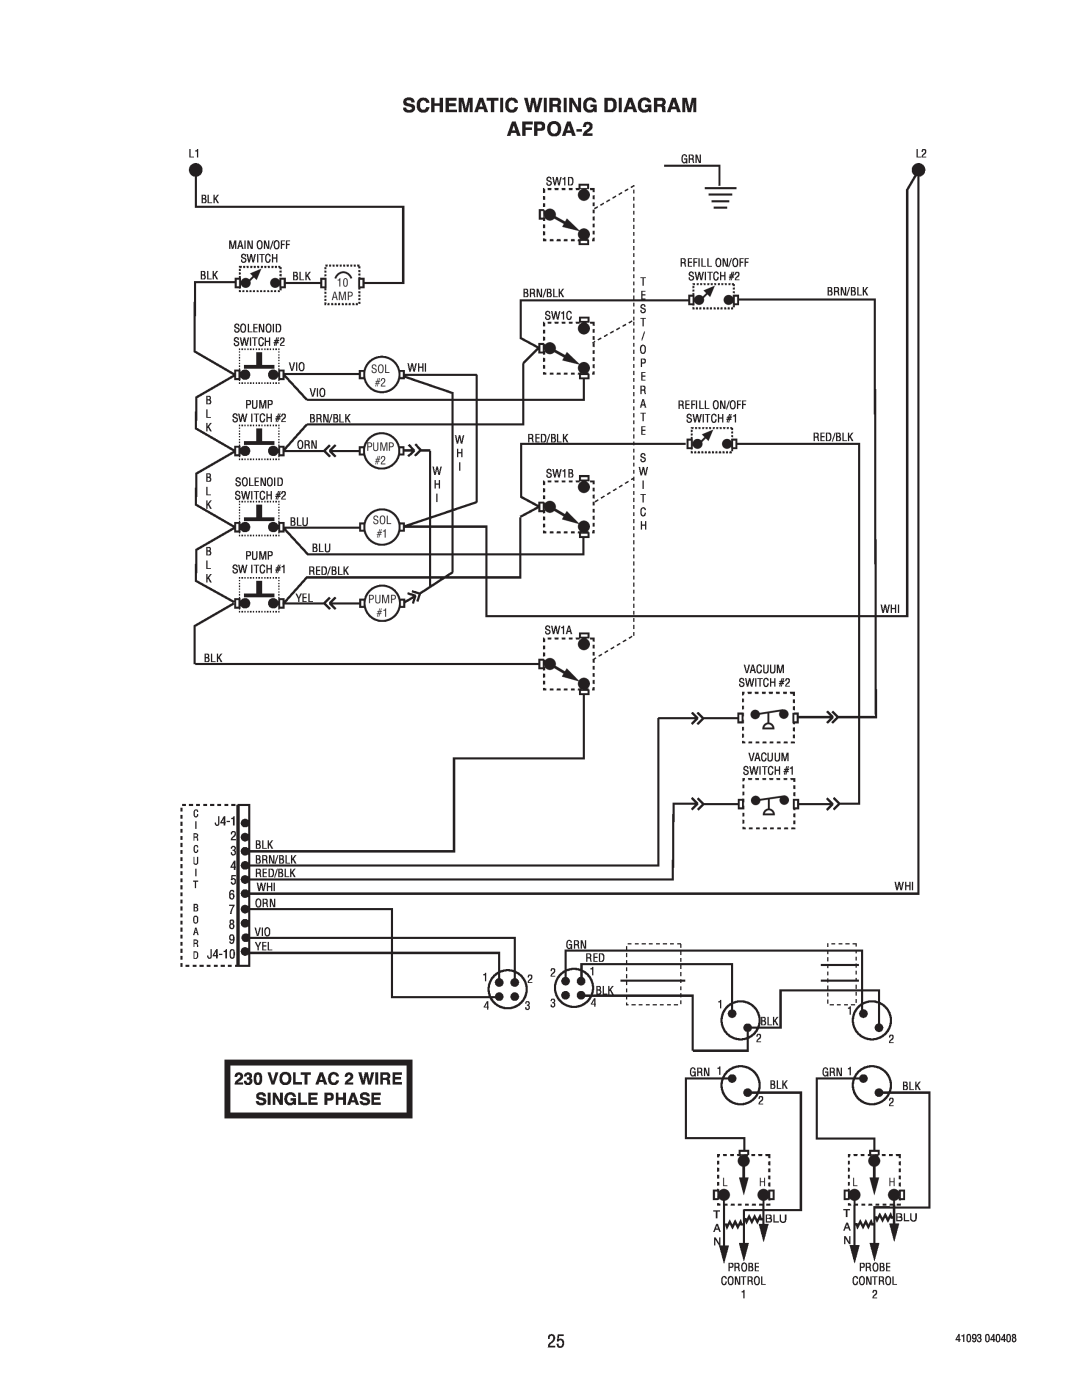 Bunn AFPO-3 SL manual SCHEMATIC WIRING DIAGRAM AFPOA-2, VOLT AC 2 WIRE, Single Phase 